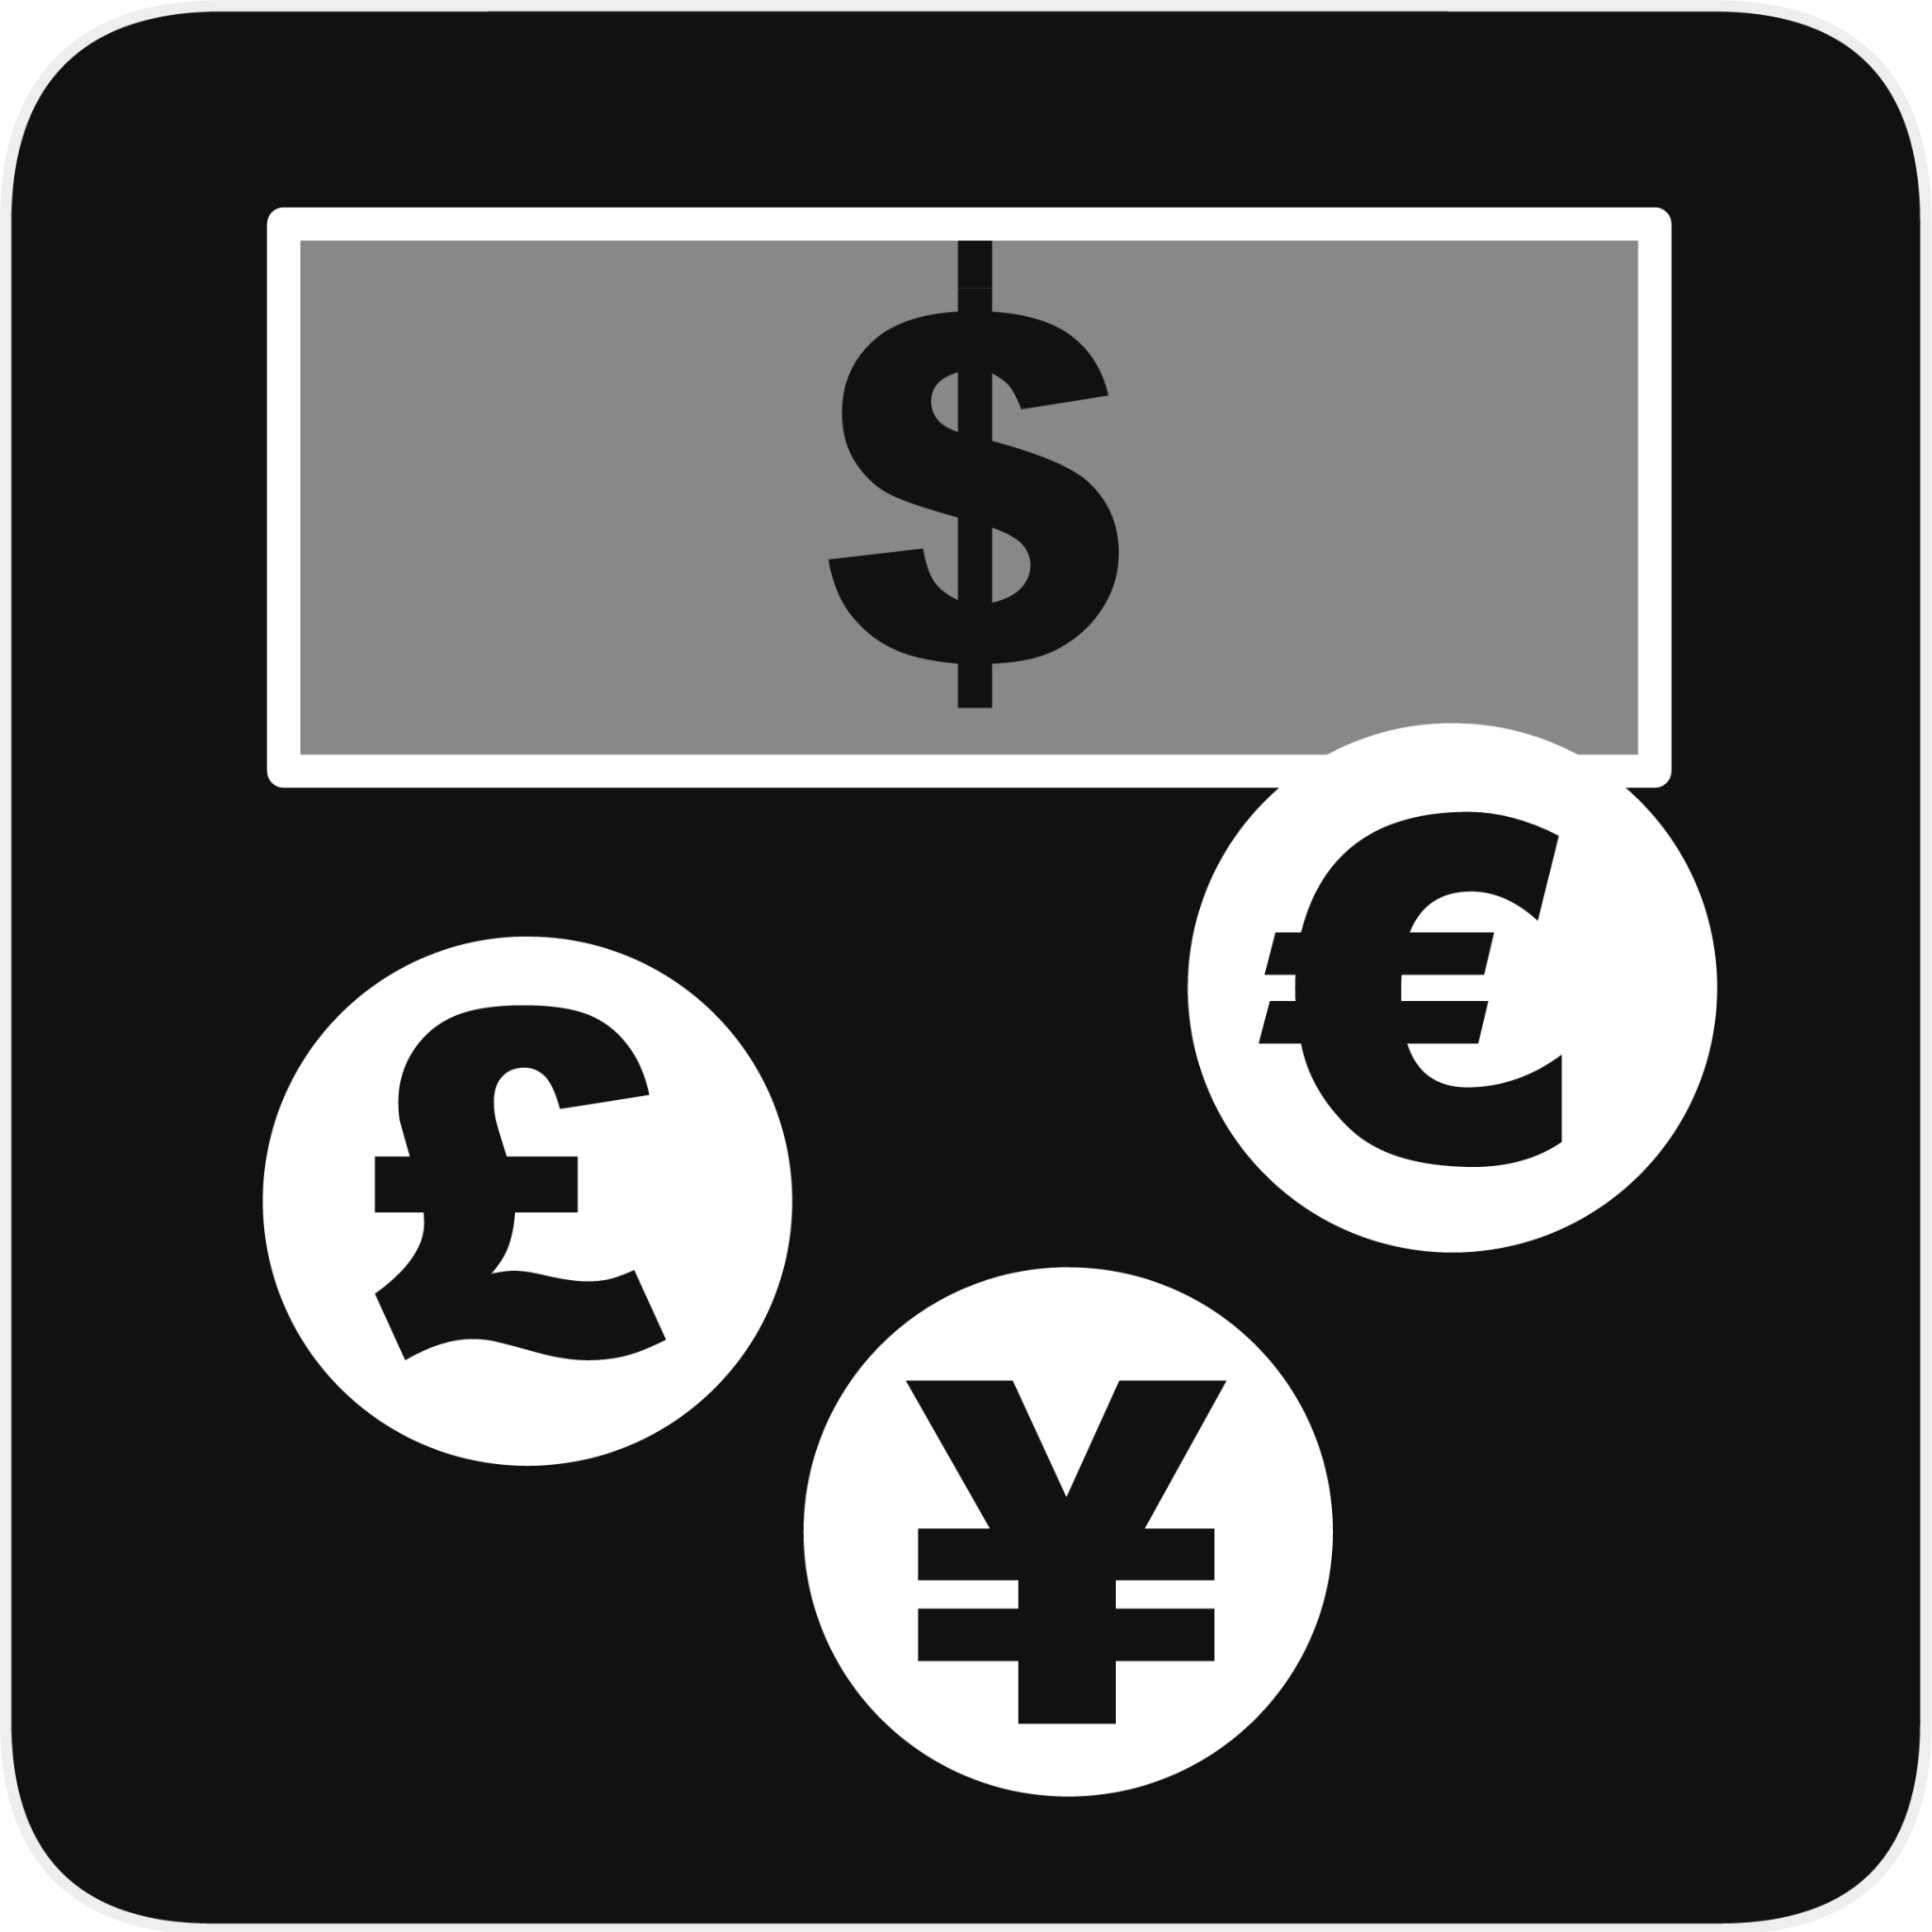 currency exchange icon